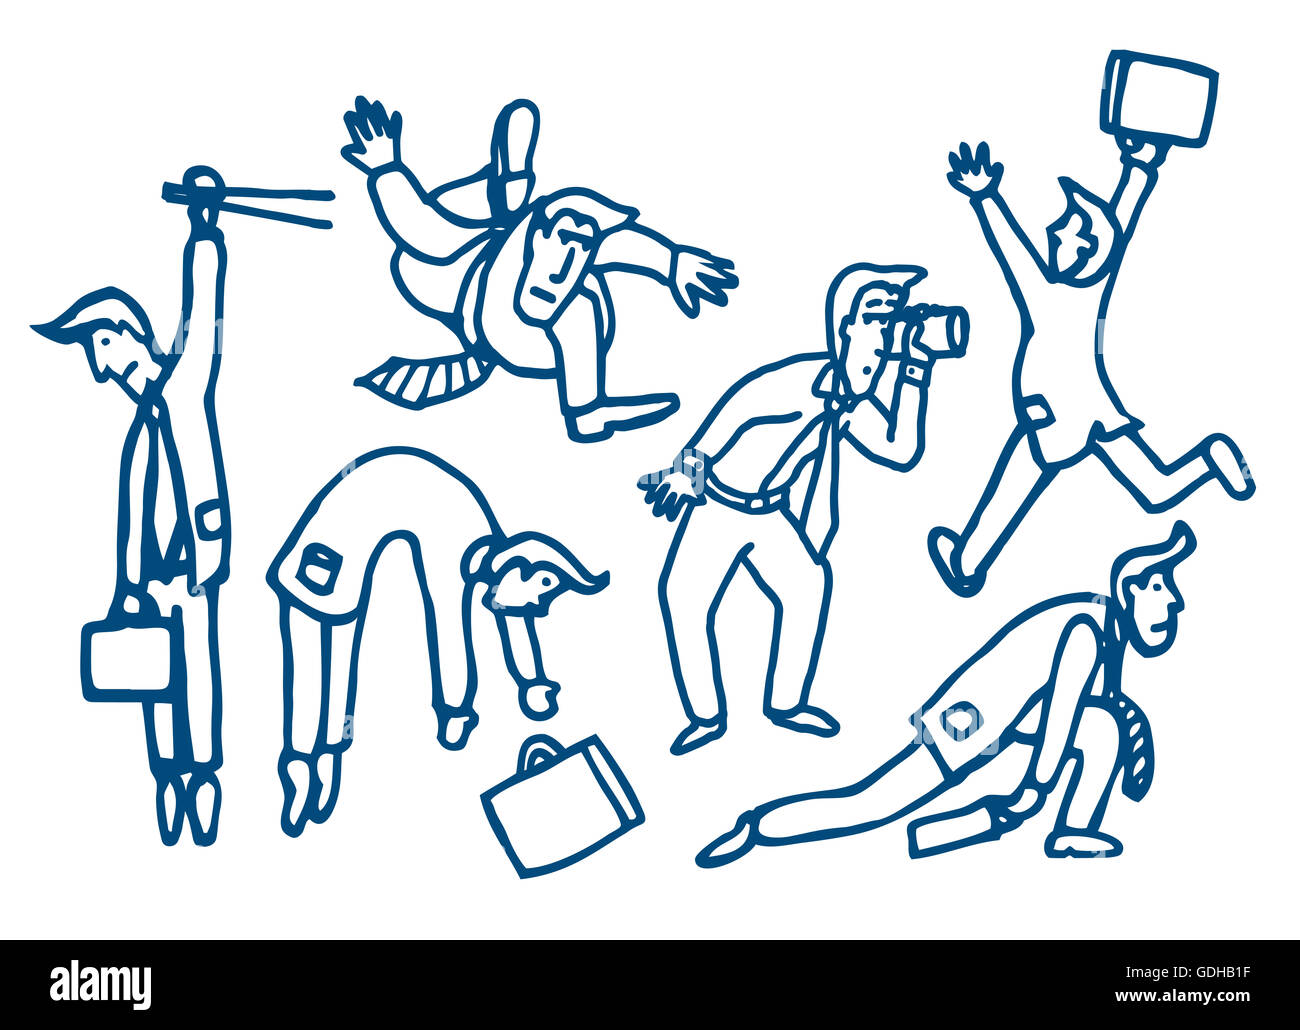 Cartoon illustration set of different businessman in action Stock Photo